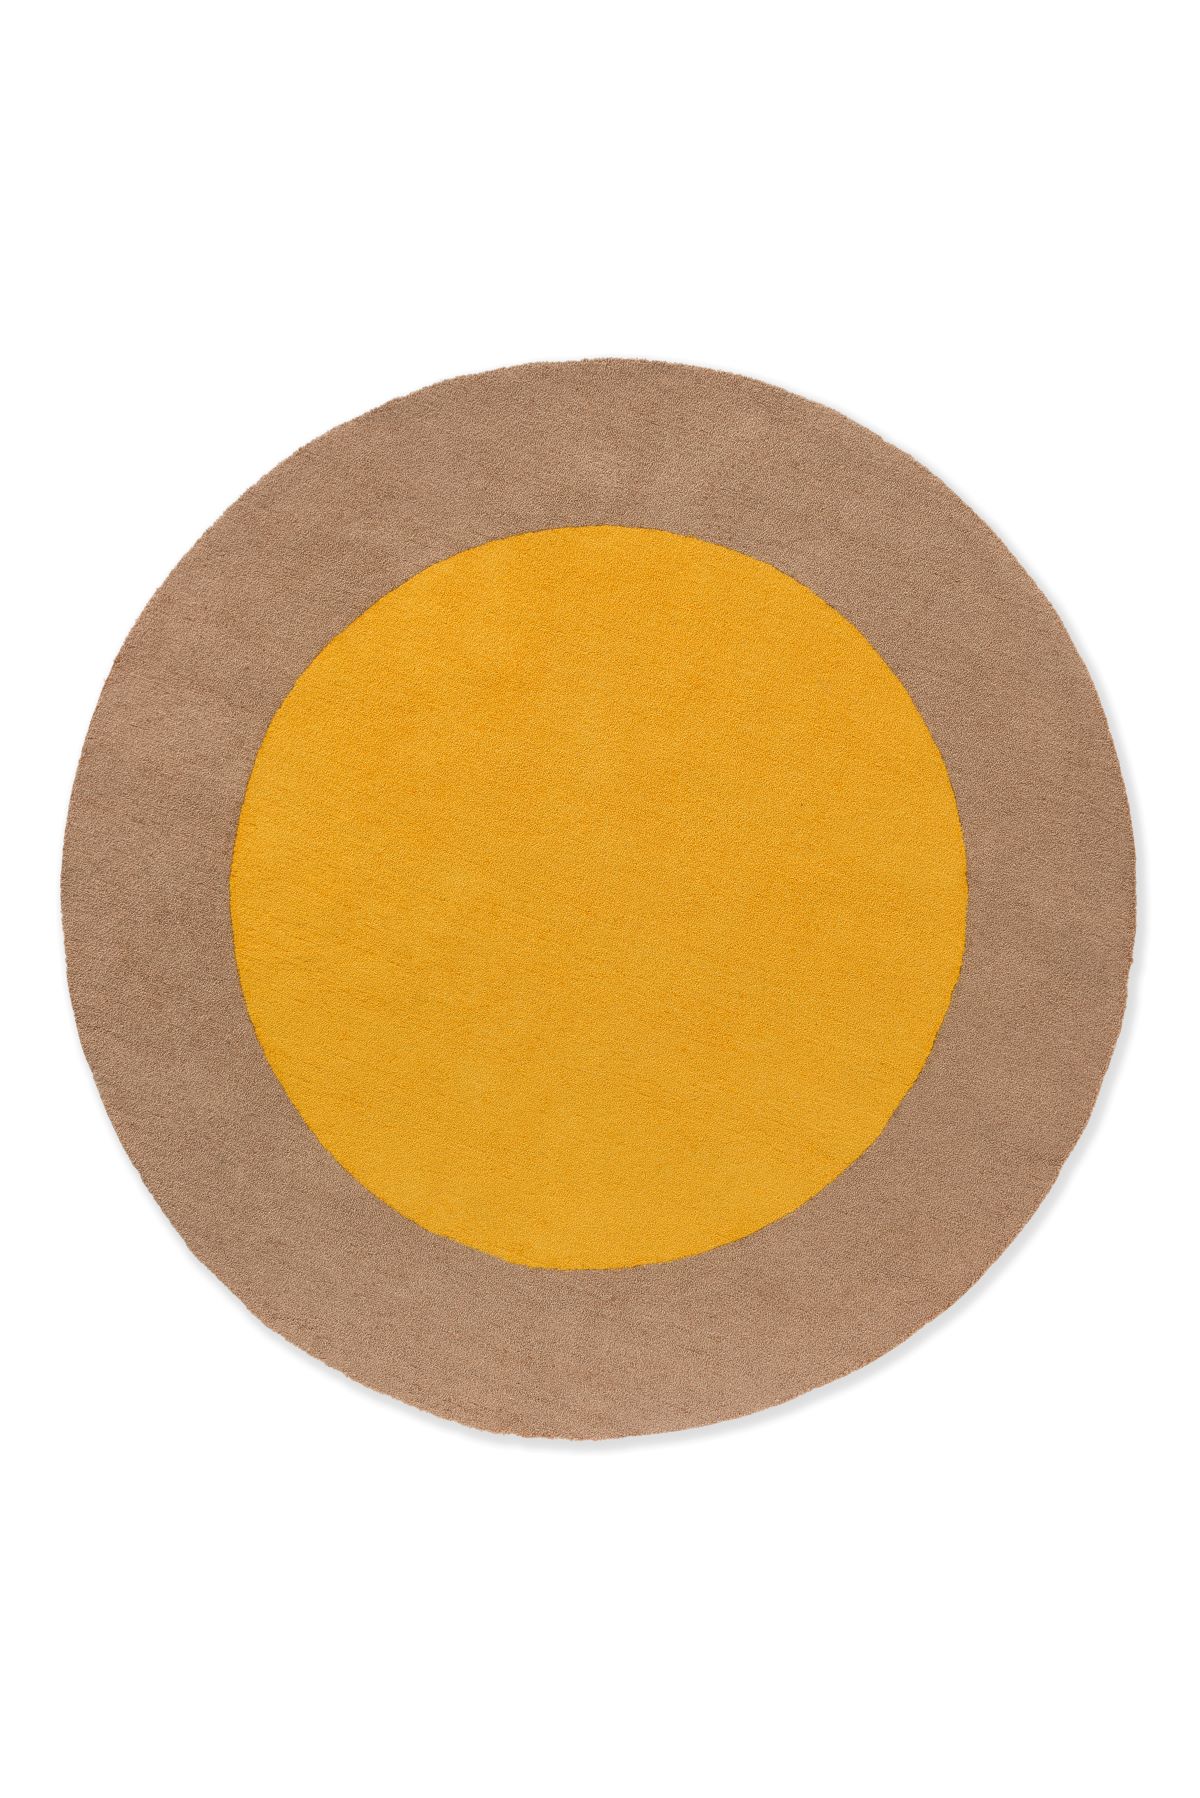 brink-and-campman-rug-habitat-festival-round-yellow-496306